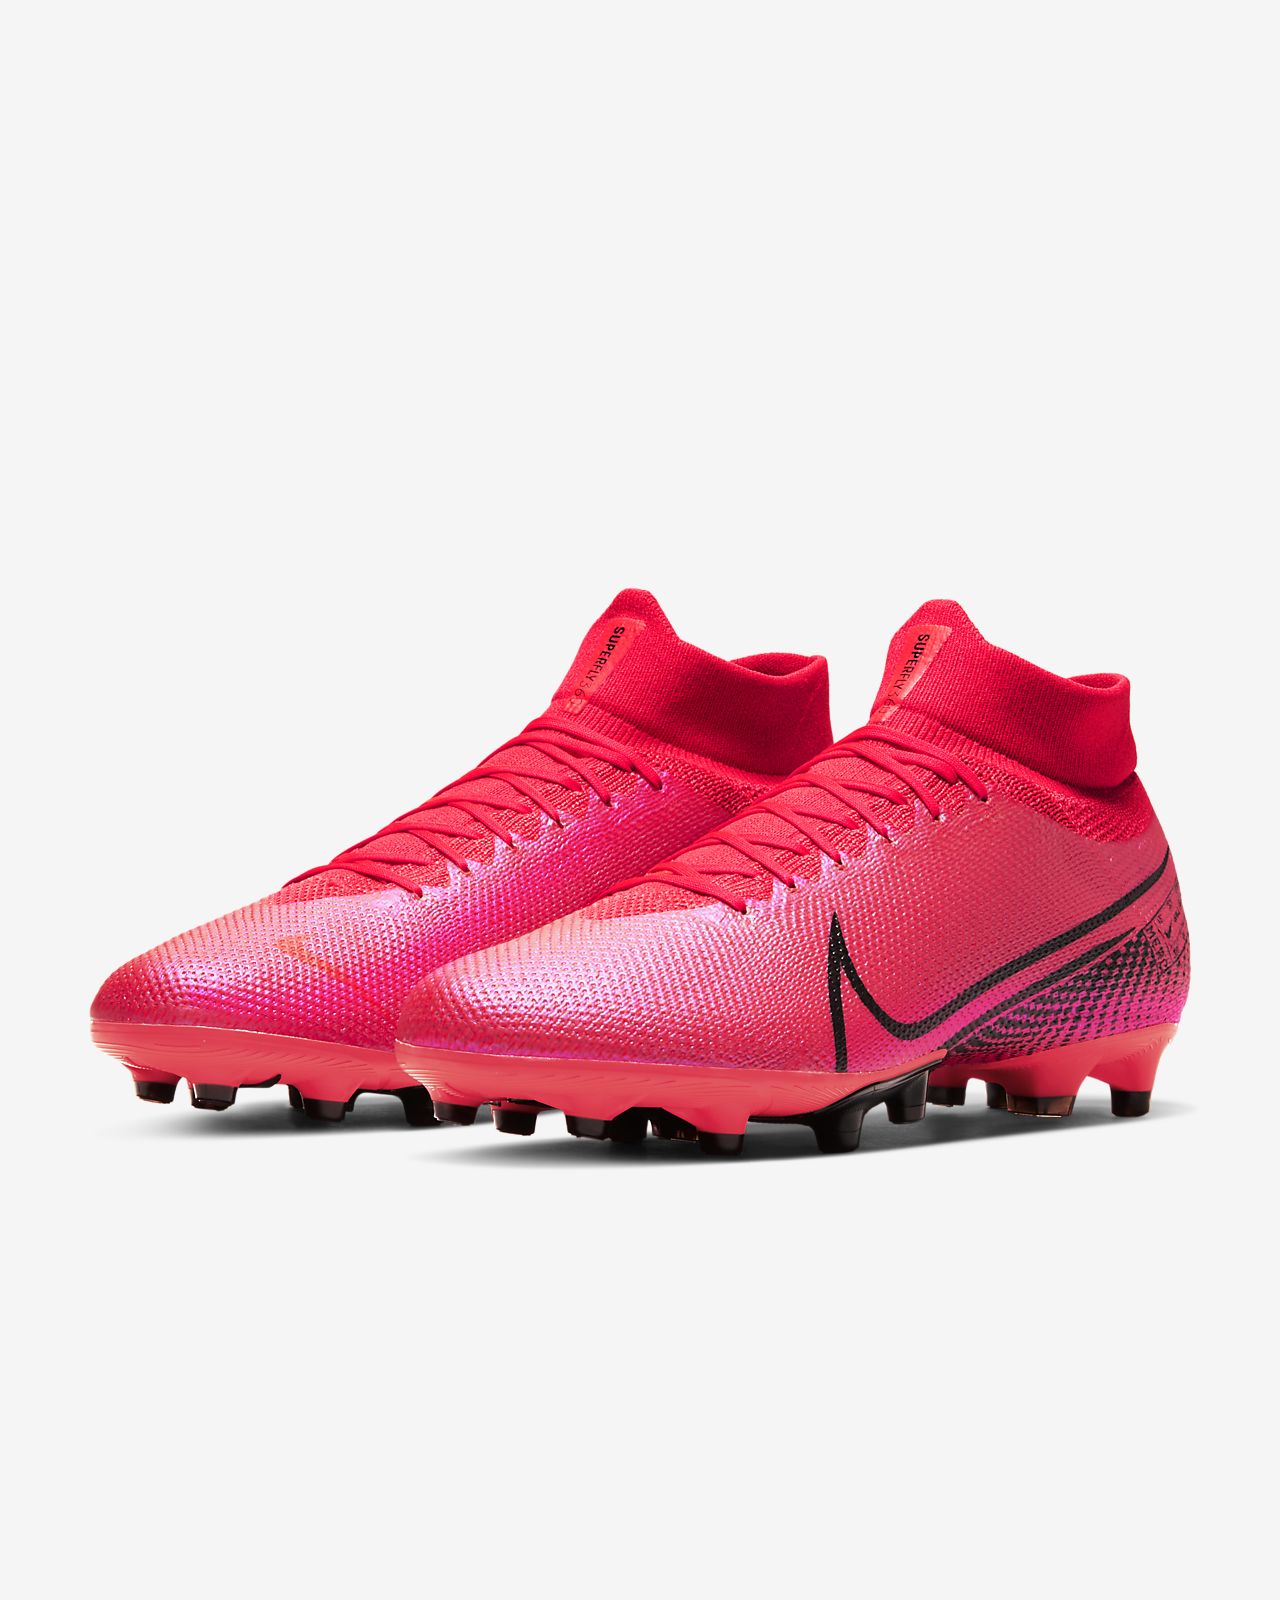 UNBOXING Nike MERCURIAL Superfly 360 ELITE AG Pro.